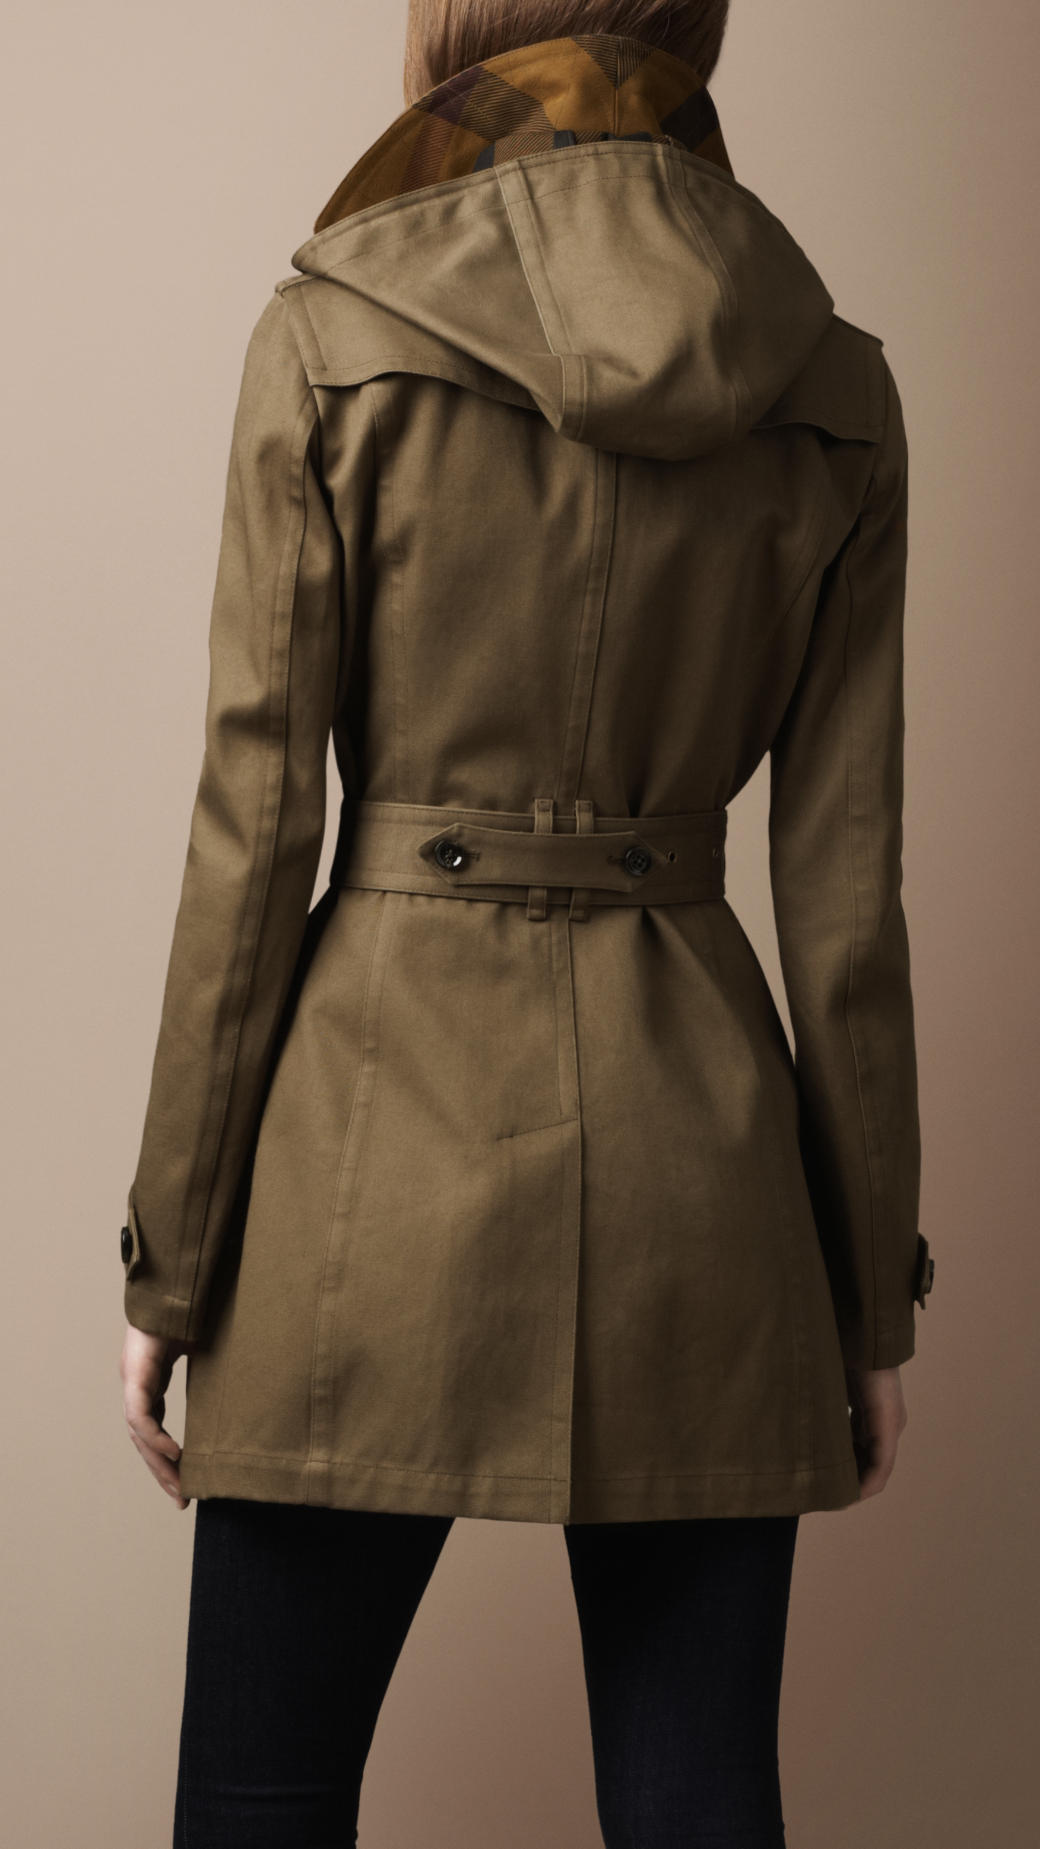 Lyst - Burberry Brit Midlength Wool Blend Hooded Trench Coat in Green